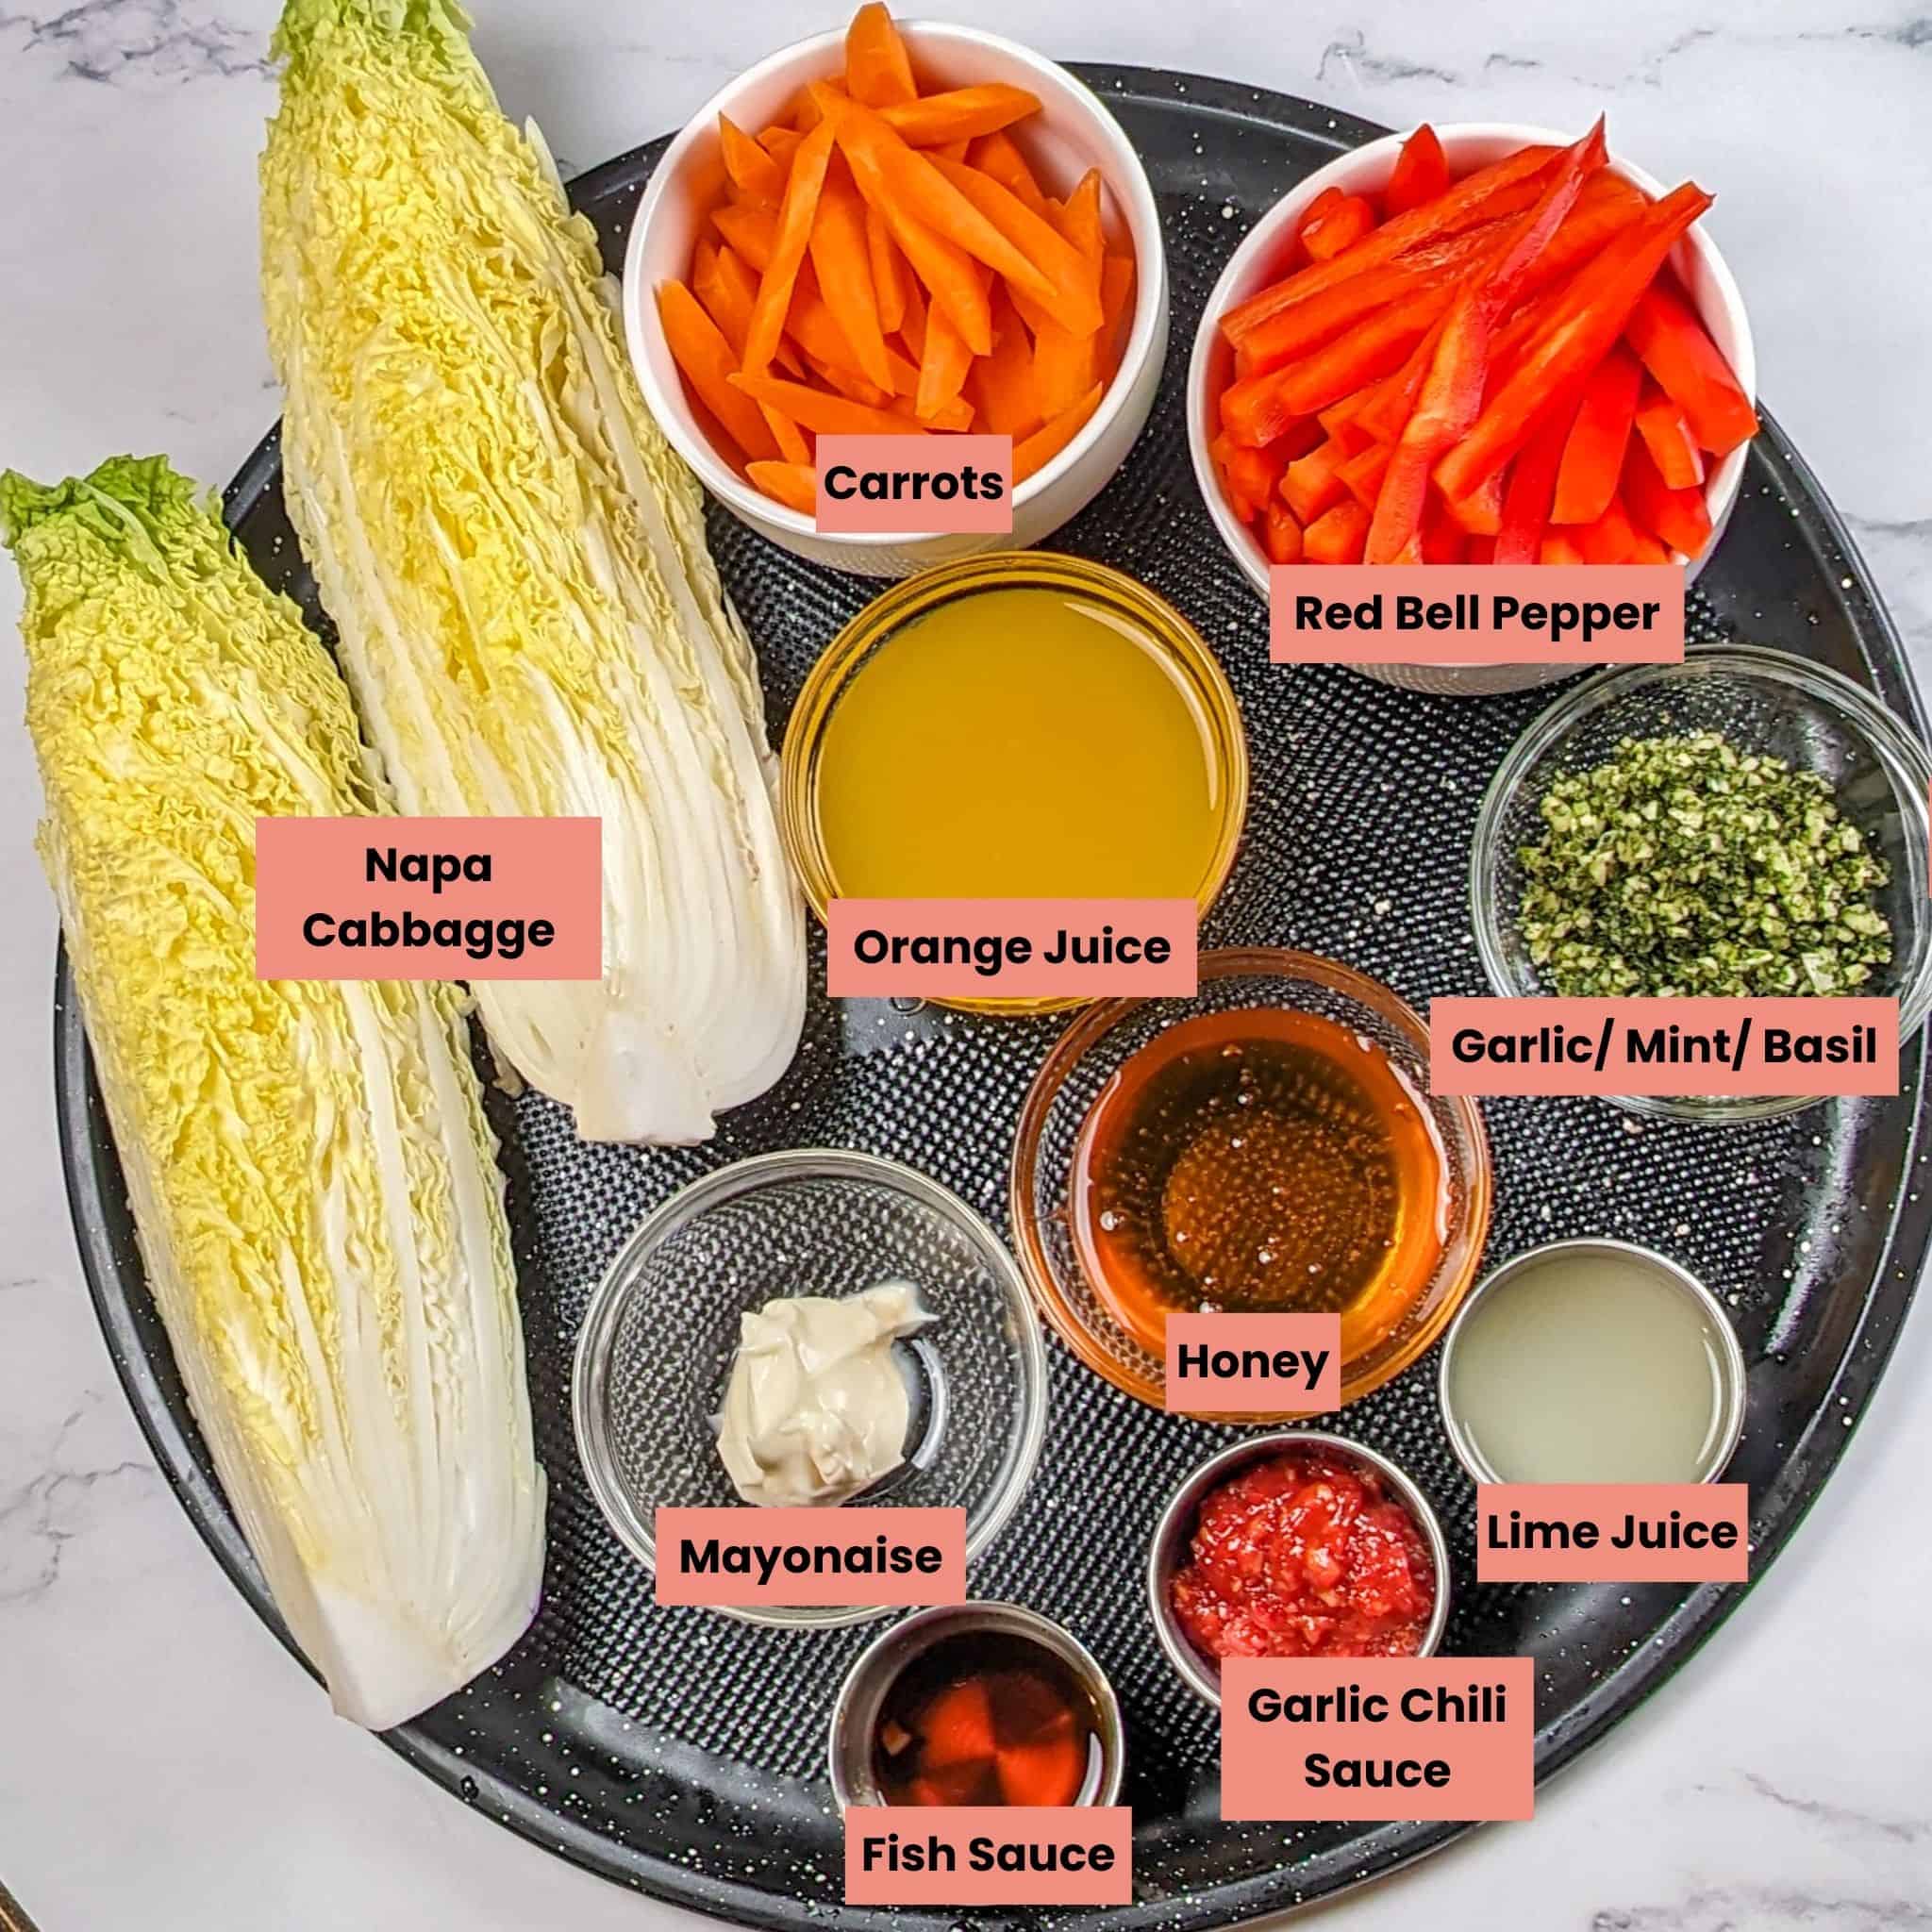 labeled Ingredients for the Sheet Pan Citrus Chili Lime Salmon with Vegetables on a large round pizza pan in glass and stainless steel containers.